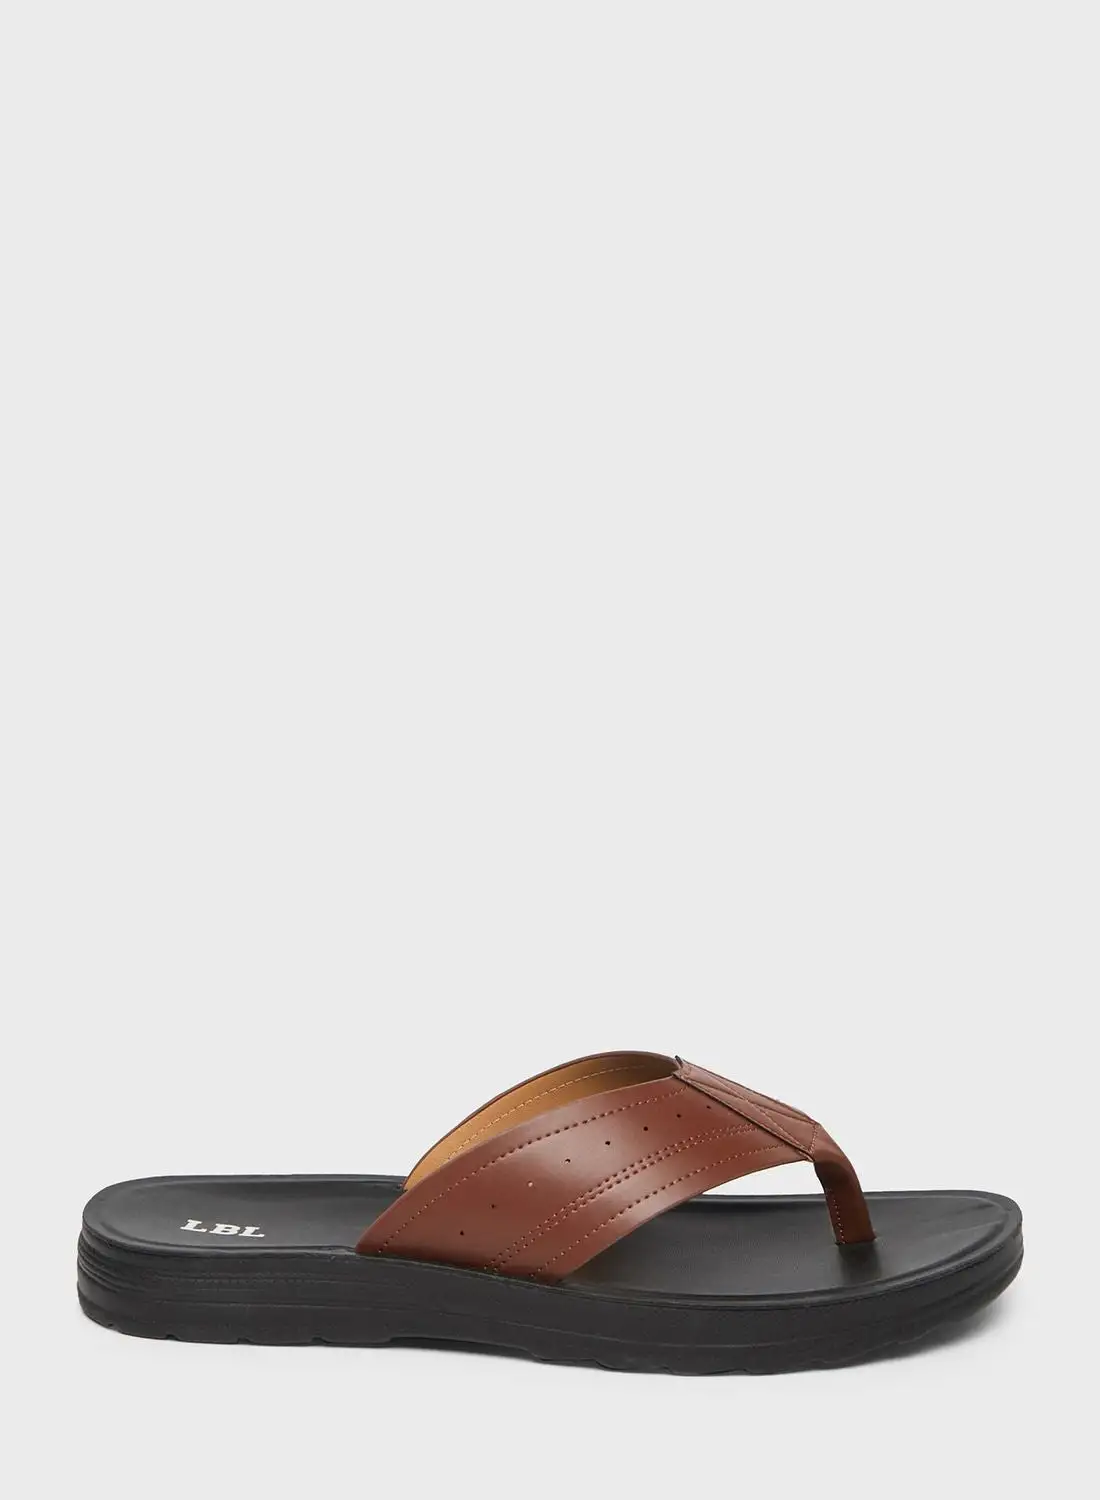 LBL by Shoexpress Casual Comfort Sandals